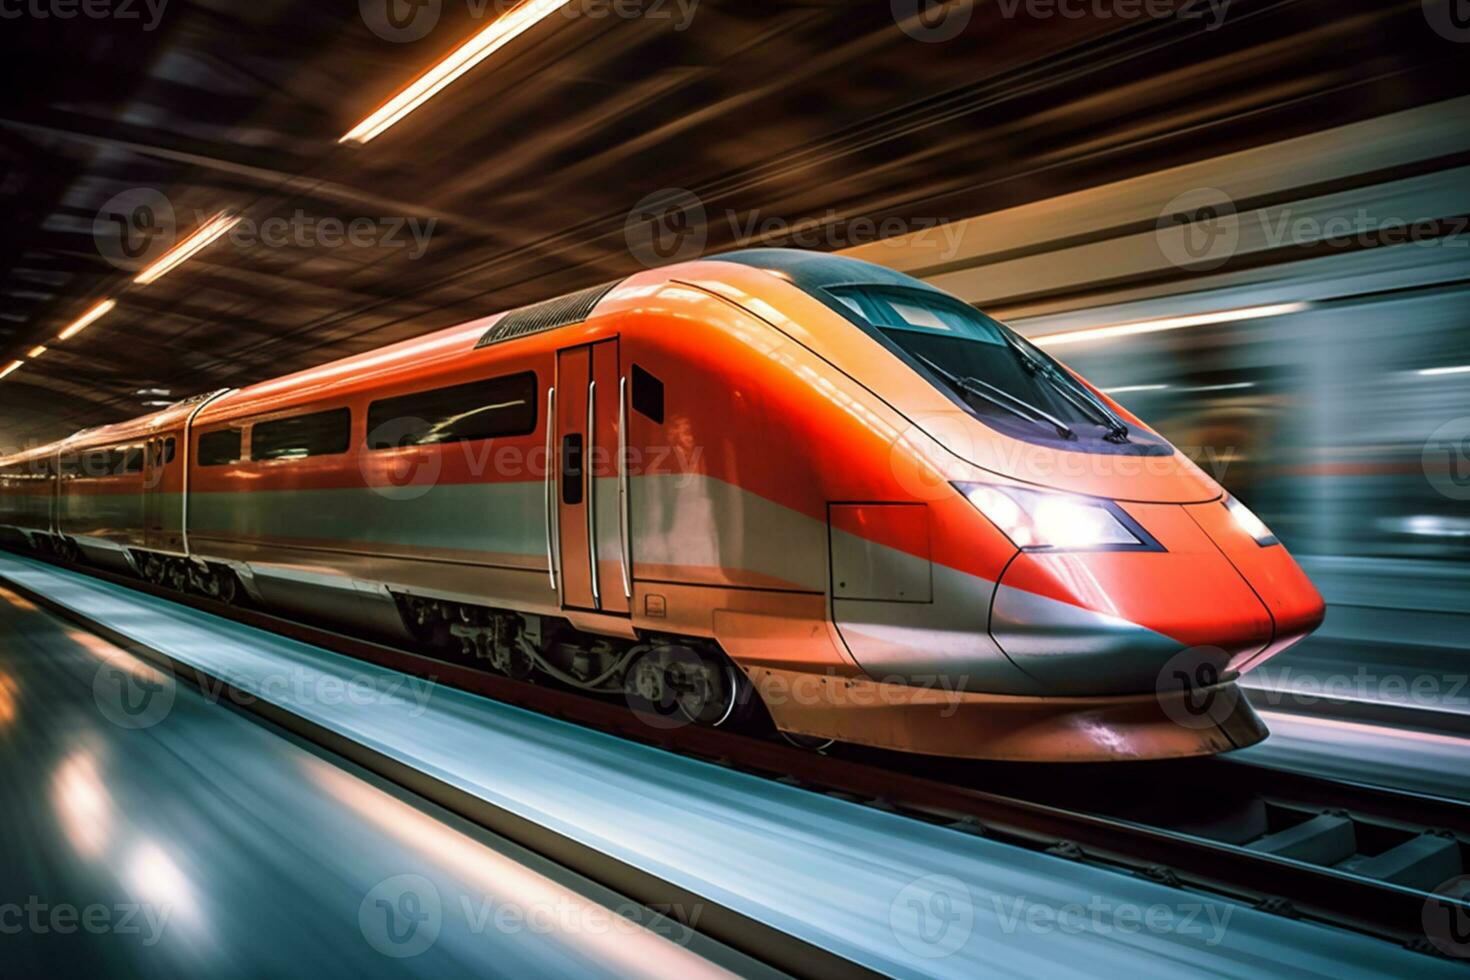 High-speed train on the background of a futuristic city 27928534